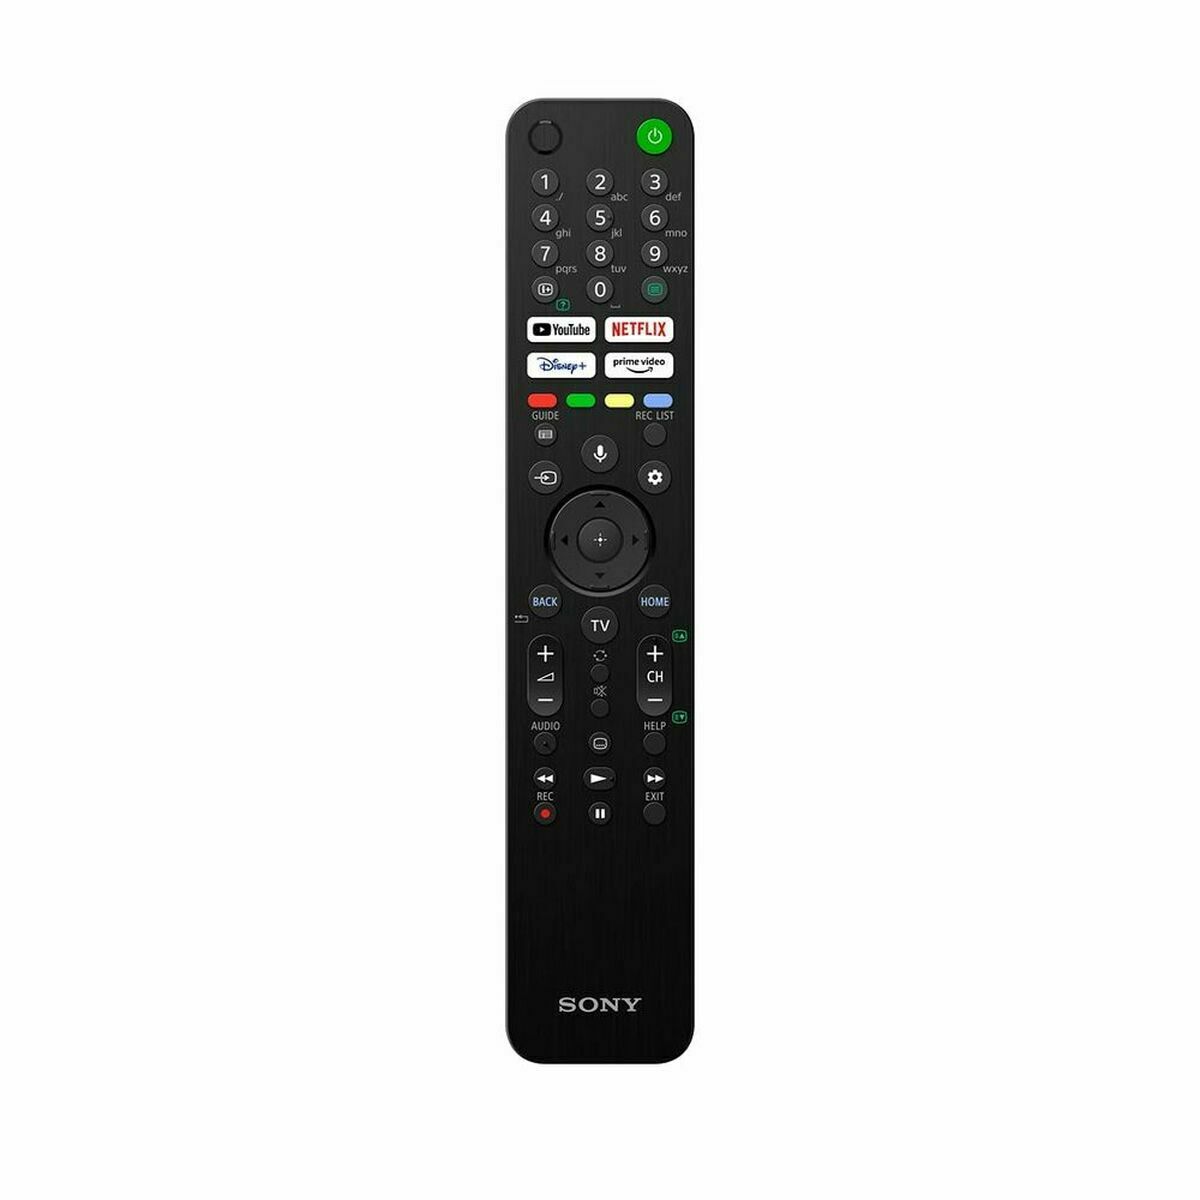 Smart TV Sony KD32W800P1AE 32 32" HD DLED WiFi 32" 80" HD LED, Sony, Electronics, TV, Video and home cinema, smart-tv-sony-kd32w800p1ae-32-32-hd-dled-wifi-32-80-hd-led, Brand_Sony, category-reference-2609, category-reference-2625, category-reference-2931, category-reference-t-18805, category-reference-t-19653, cinema and television, Condition_NEW, entertainment, Price_300 - 400, RiotNook